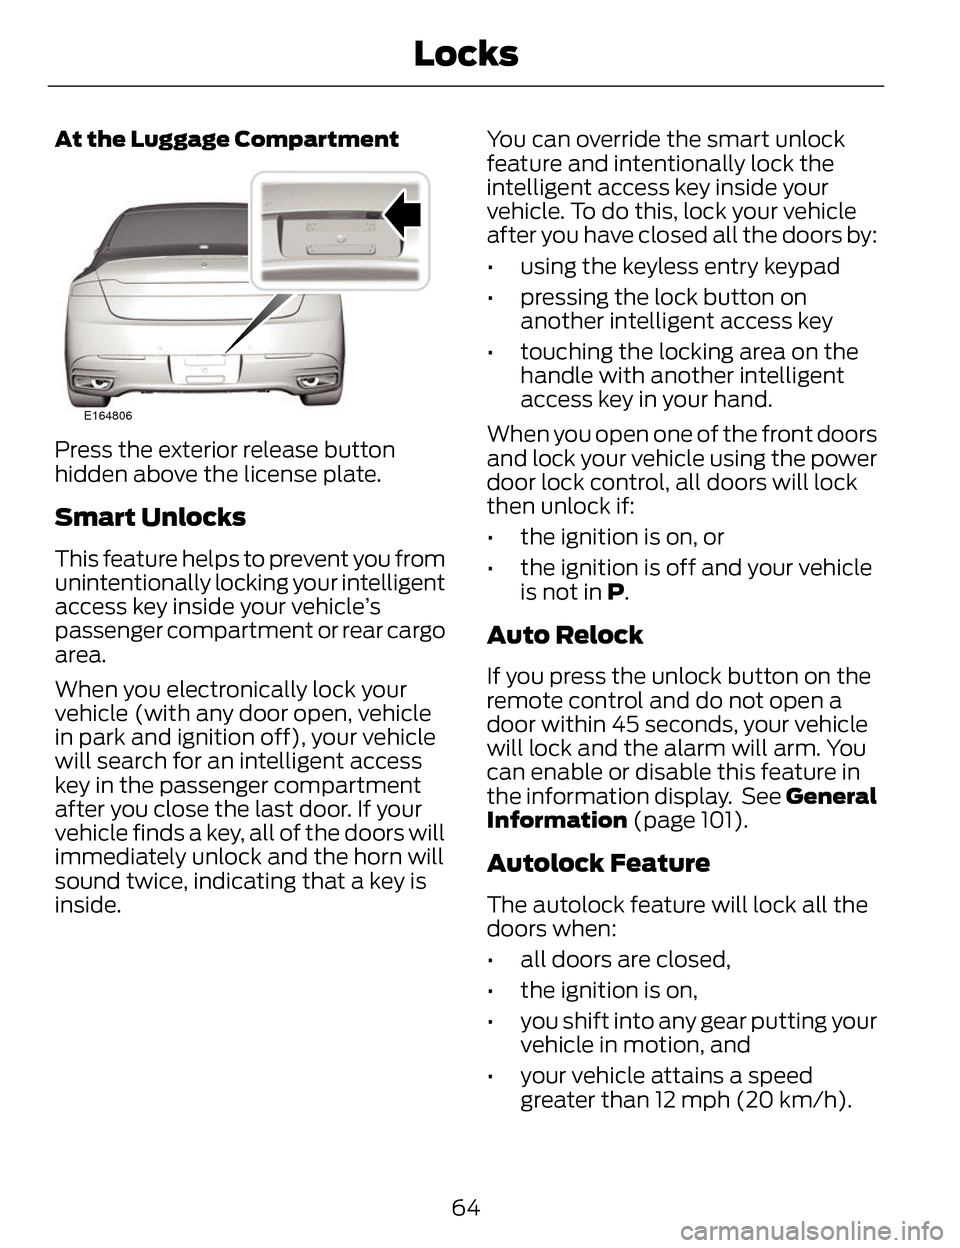 LINCOLN MKZ 2014  Owners Manual At the Luggage Compartment
E164806
Press the exterior release button
hidden above the license plate.
Smart Unlocks
This feature helps to prevent you from
unintentionally locking your intelligent
acces